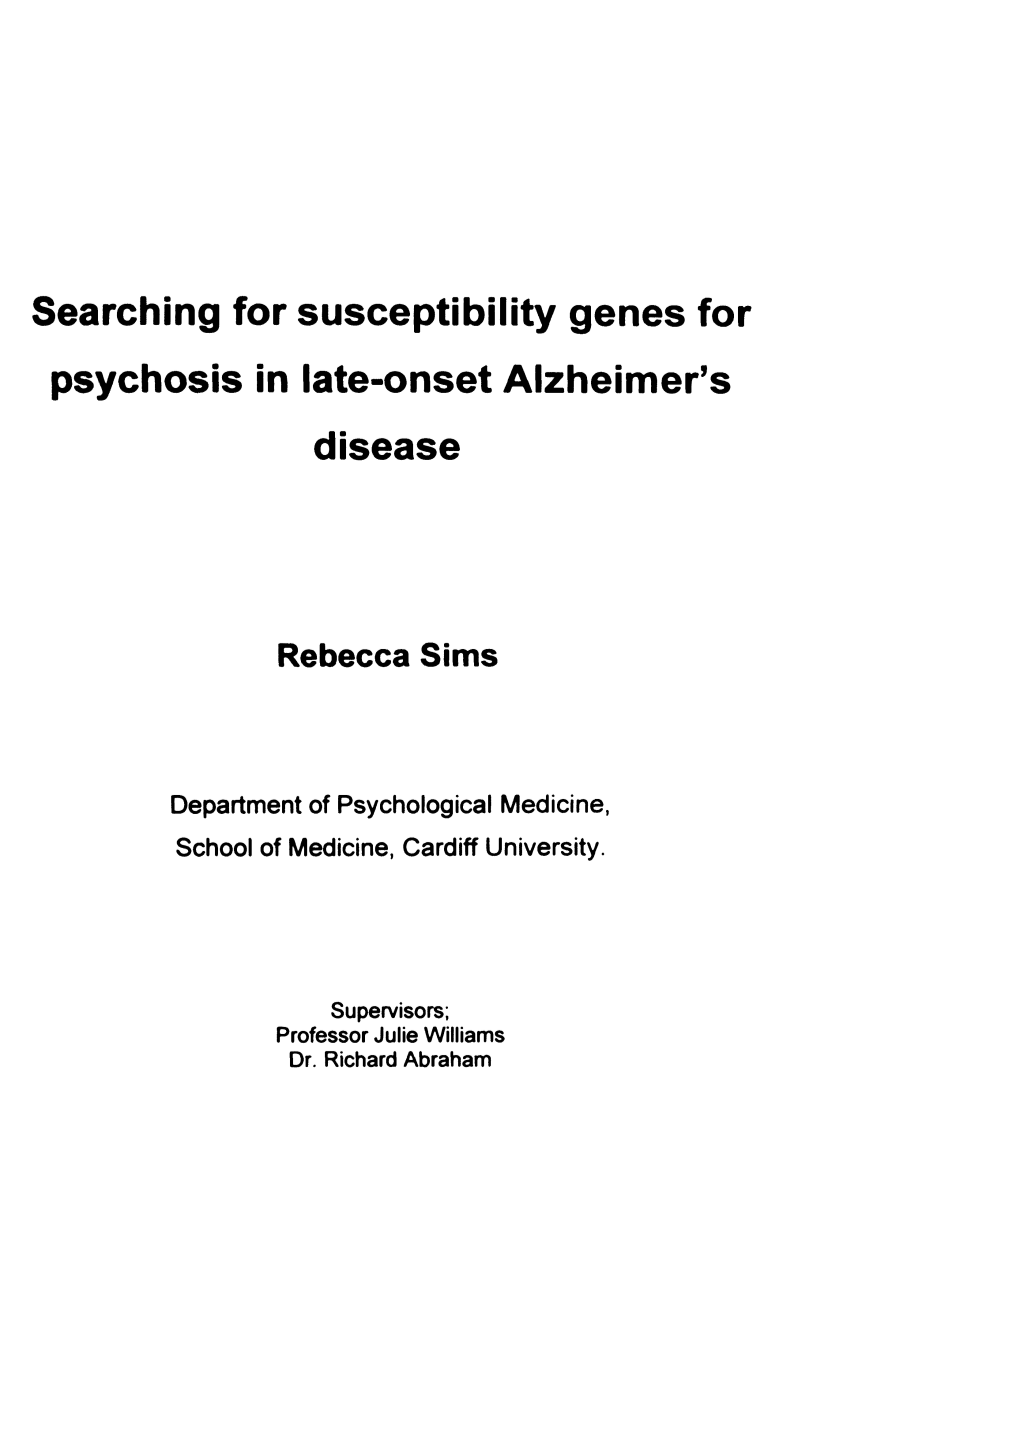 Searching for Susceptibility Genes for Psychosis in Late-Onset Alzheimer’S Disease